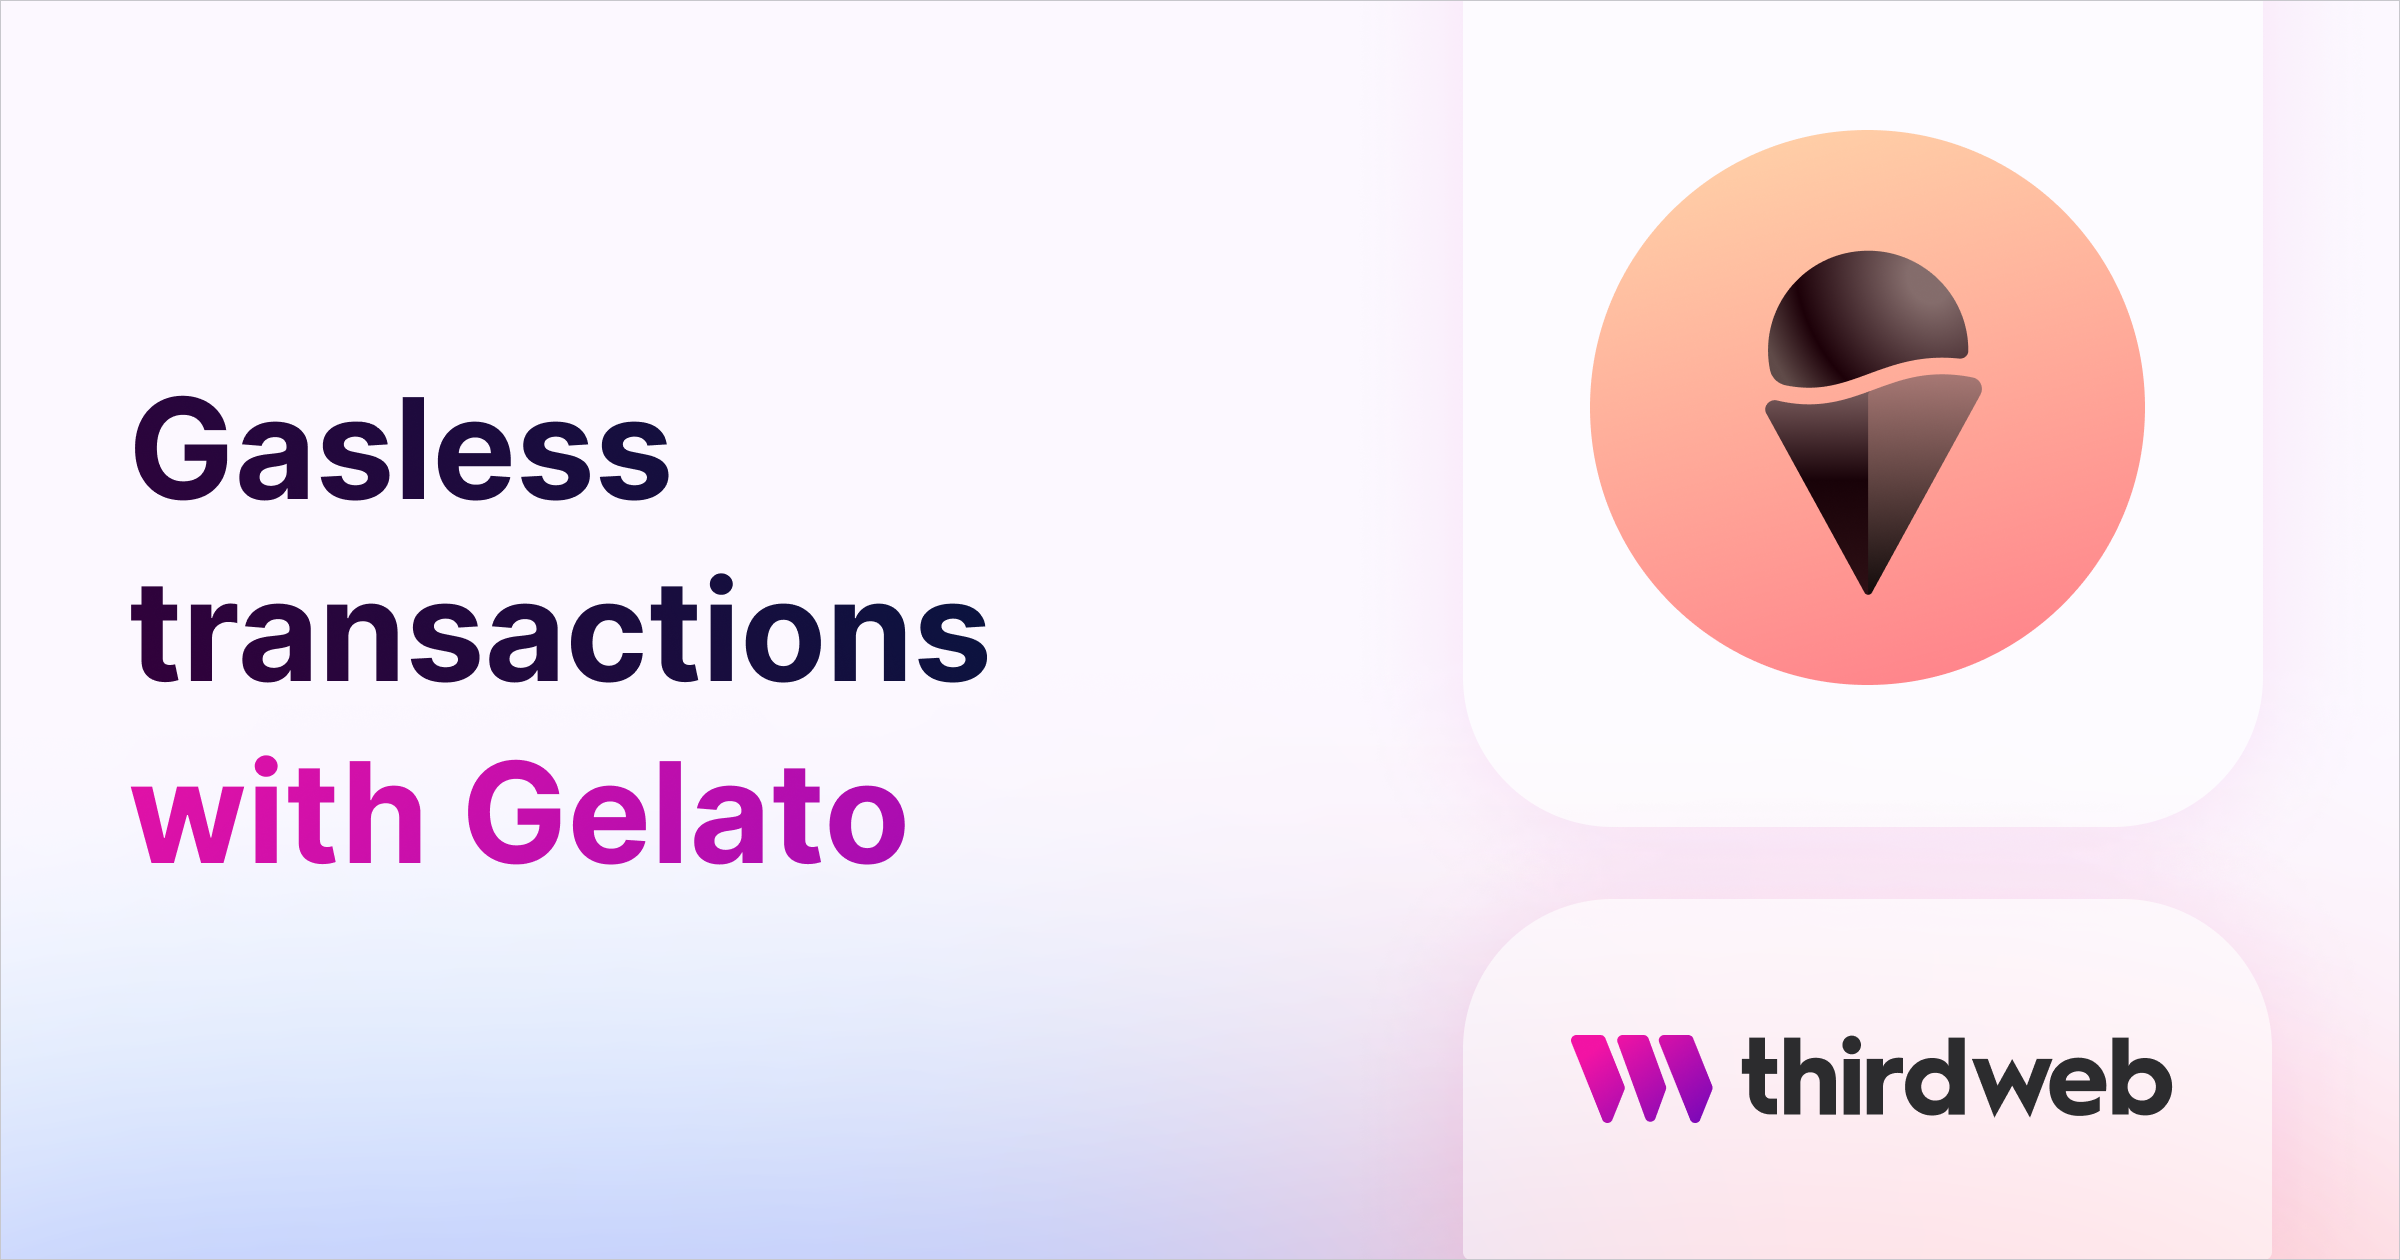 Going Gasless and sponsoring transactions with Gelato